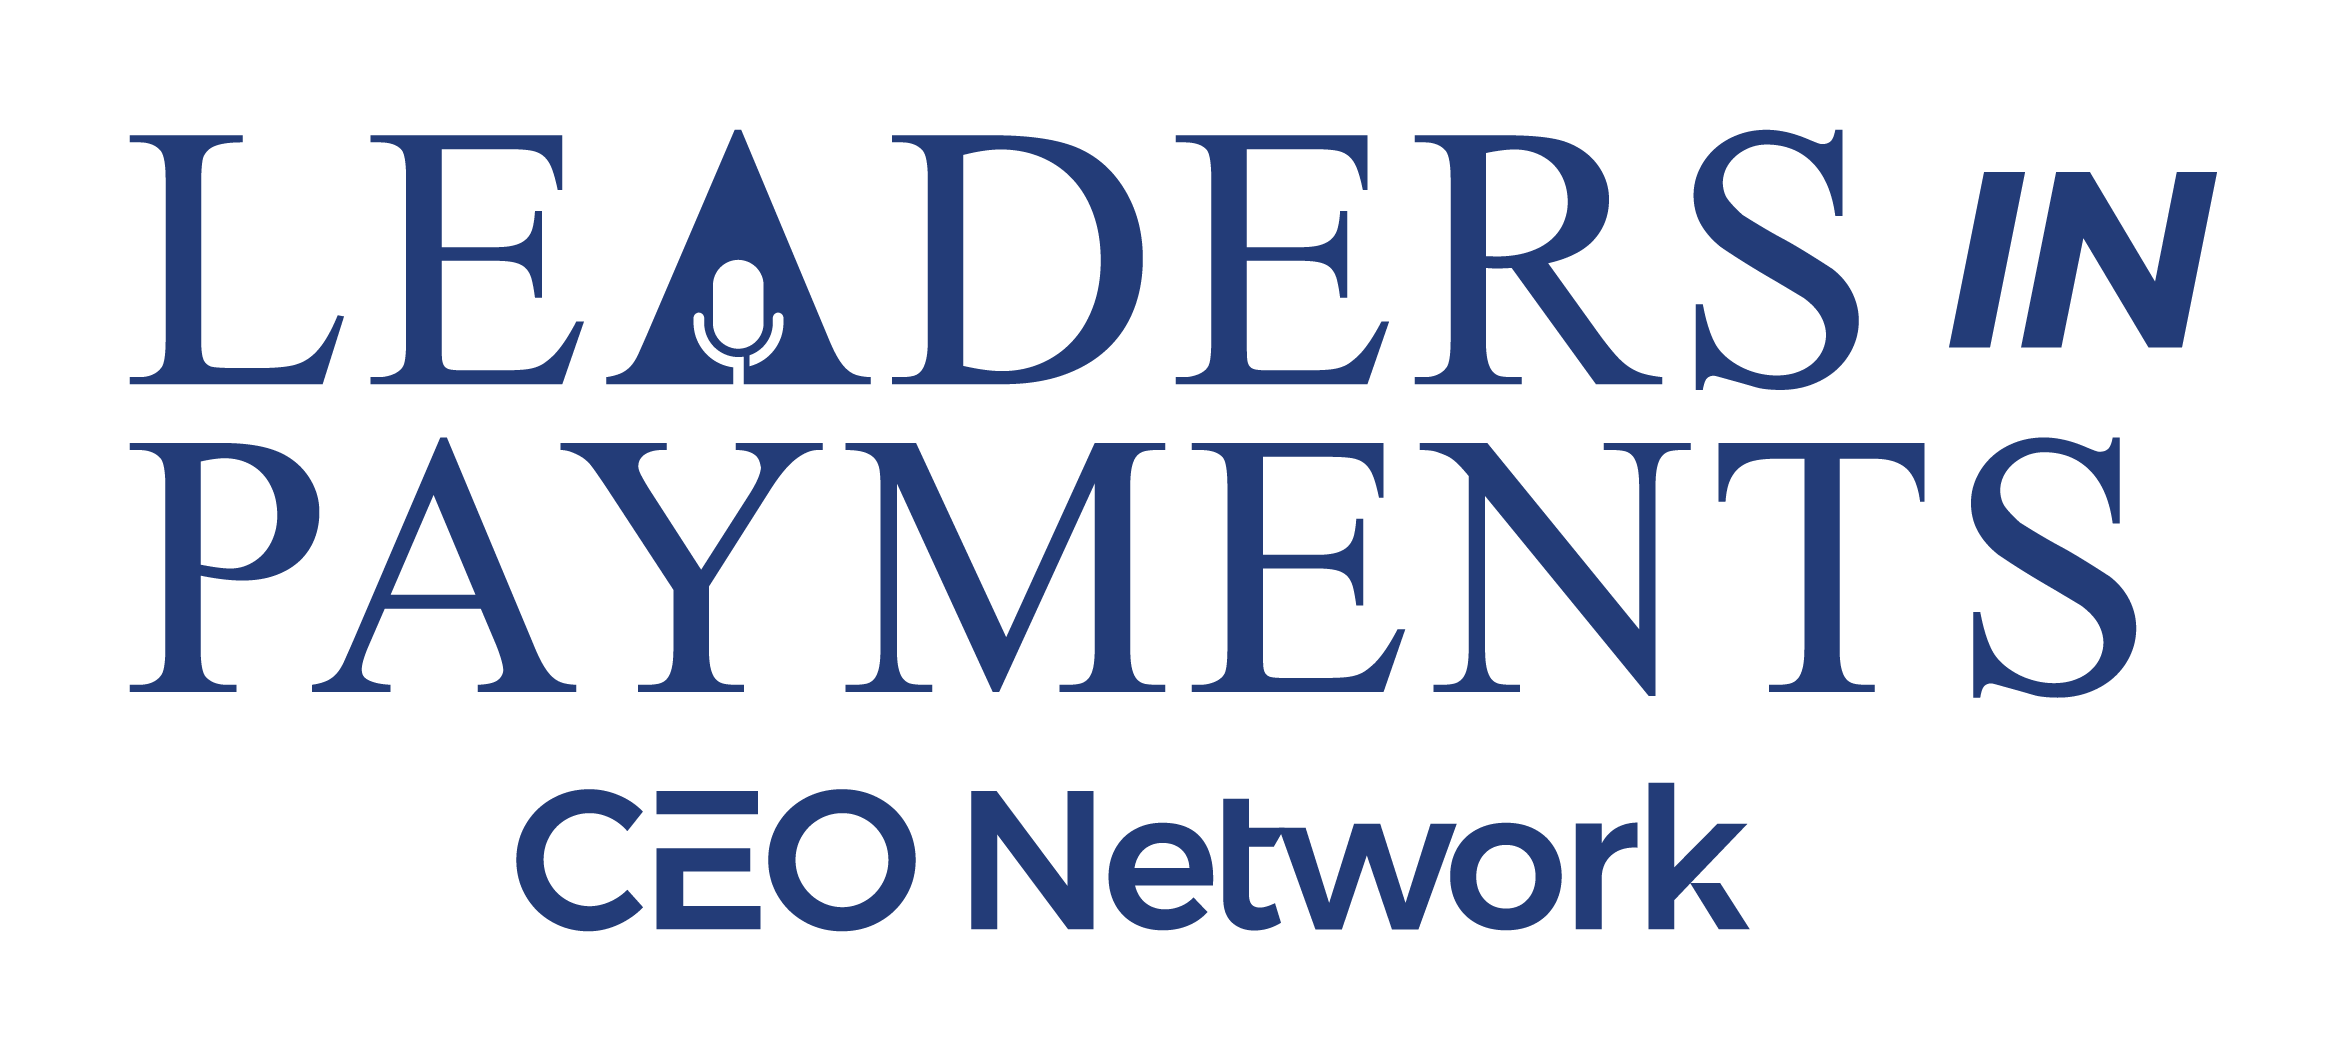 Leaders in Payments CEO Network